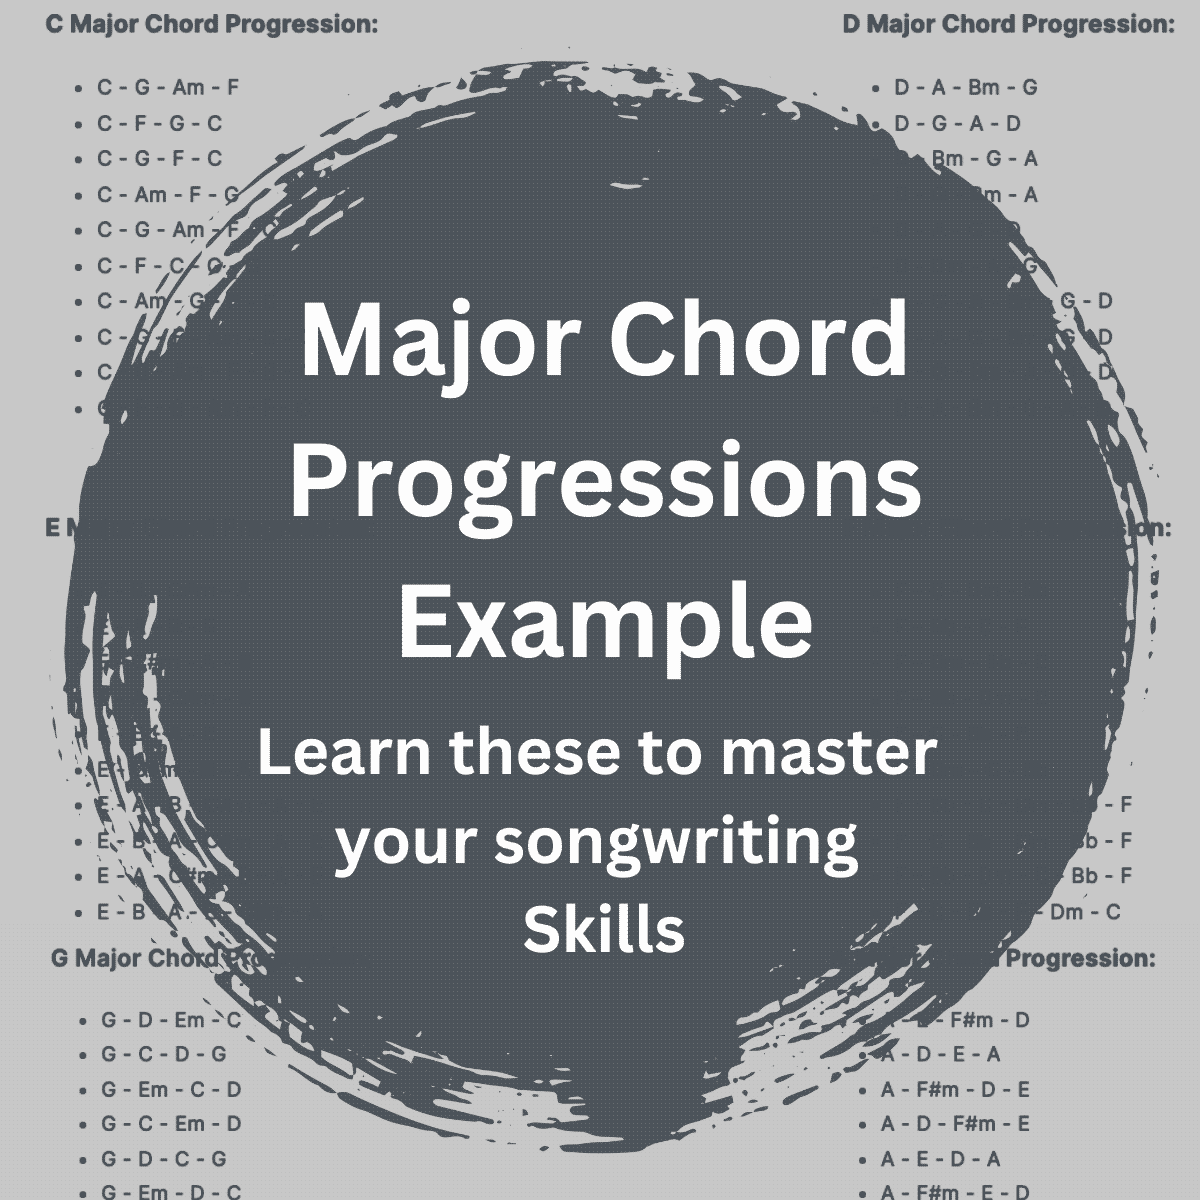 All Major Chord Progression Examples For Guitar and Piano